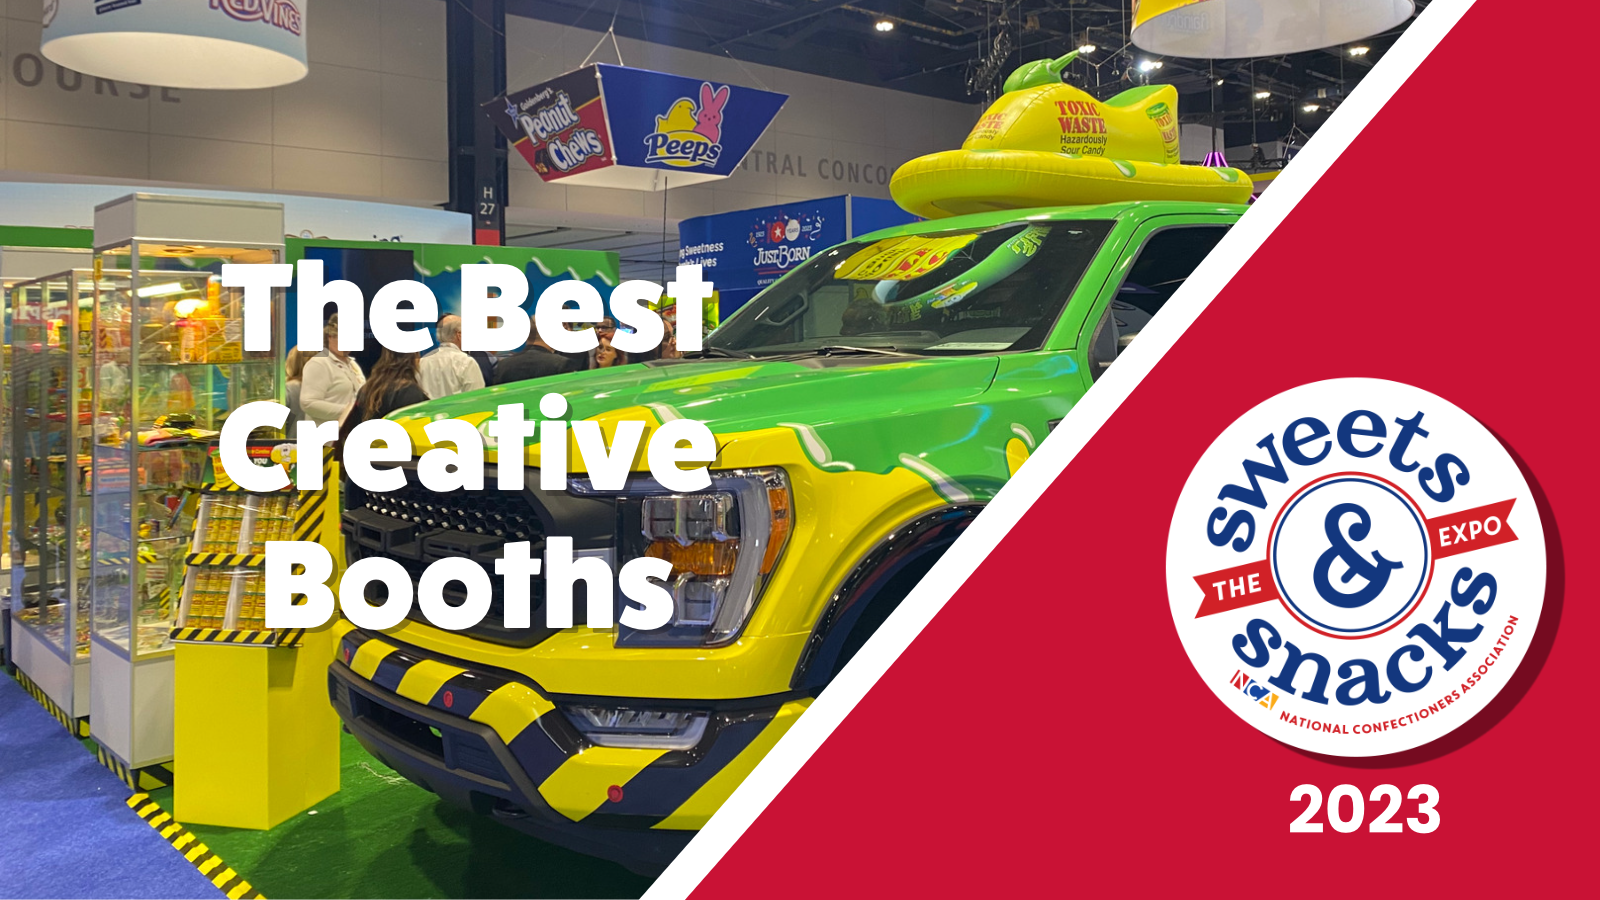 Top 5 Most Creative Booths at the 2023 Sweets & Snacks Expo